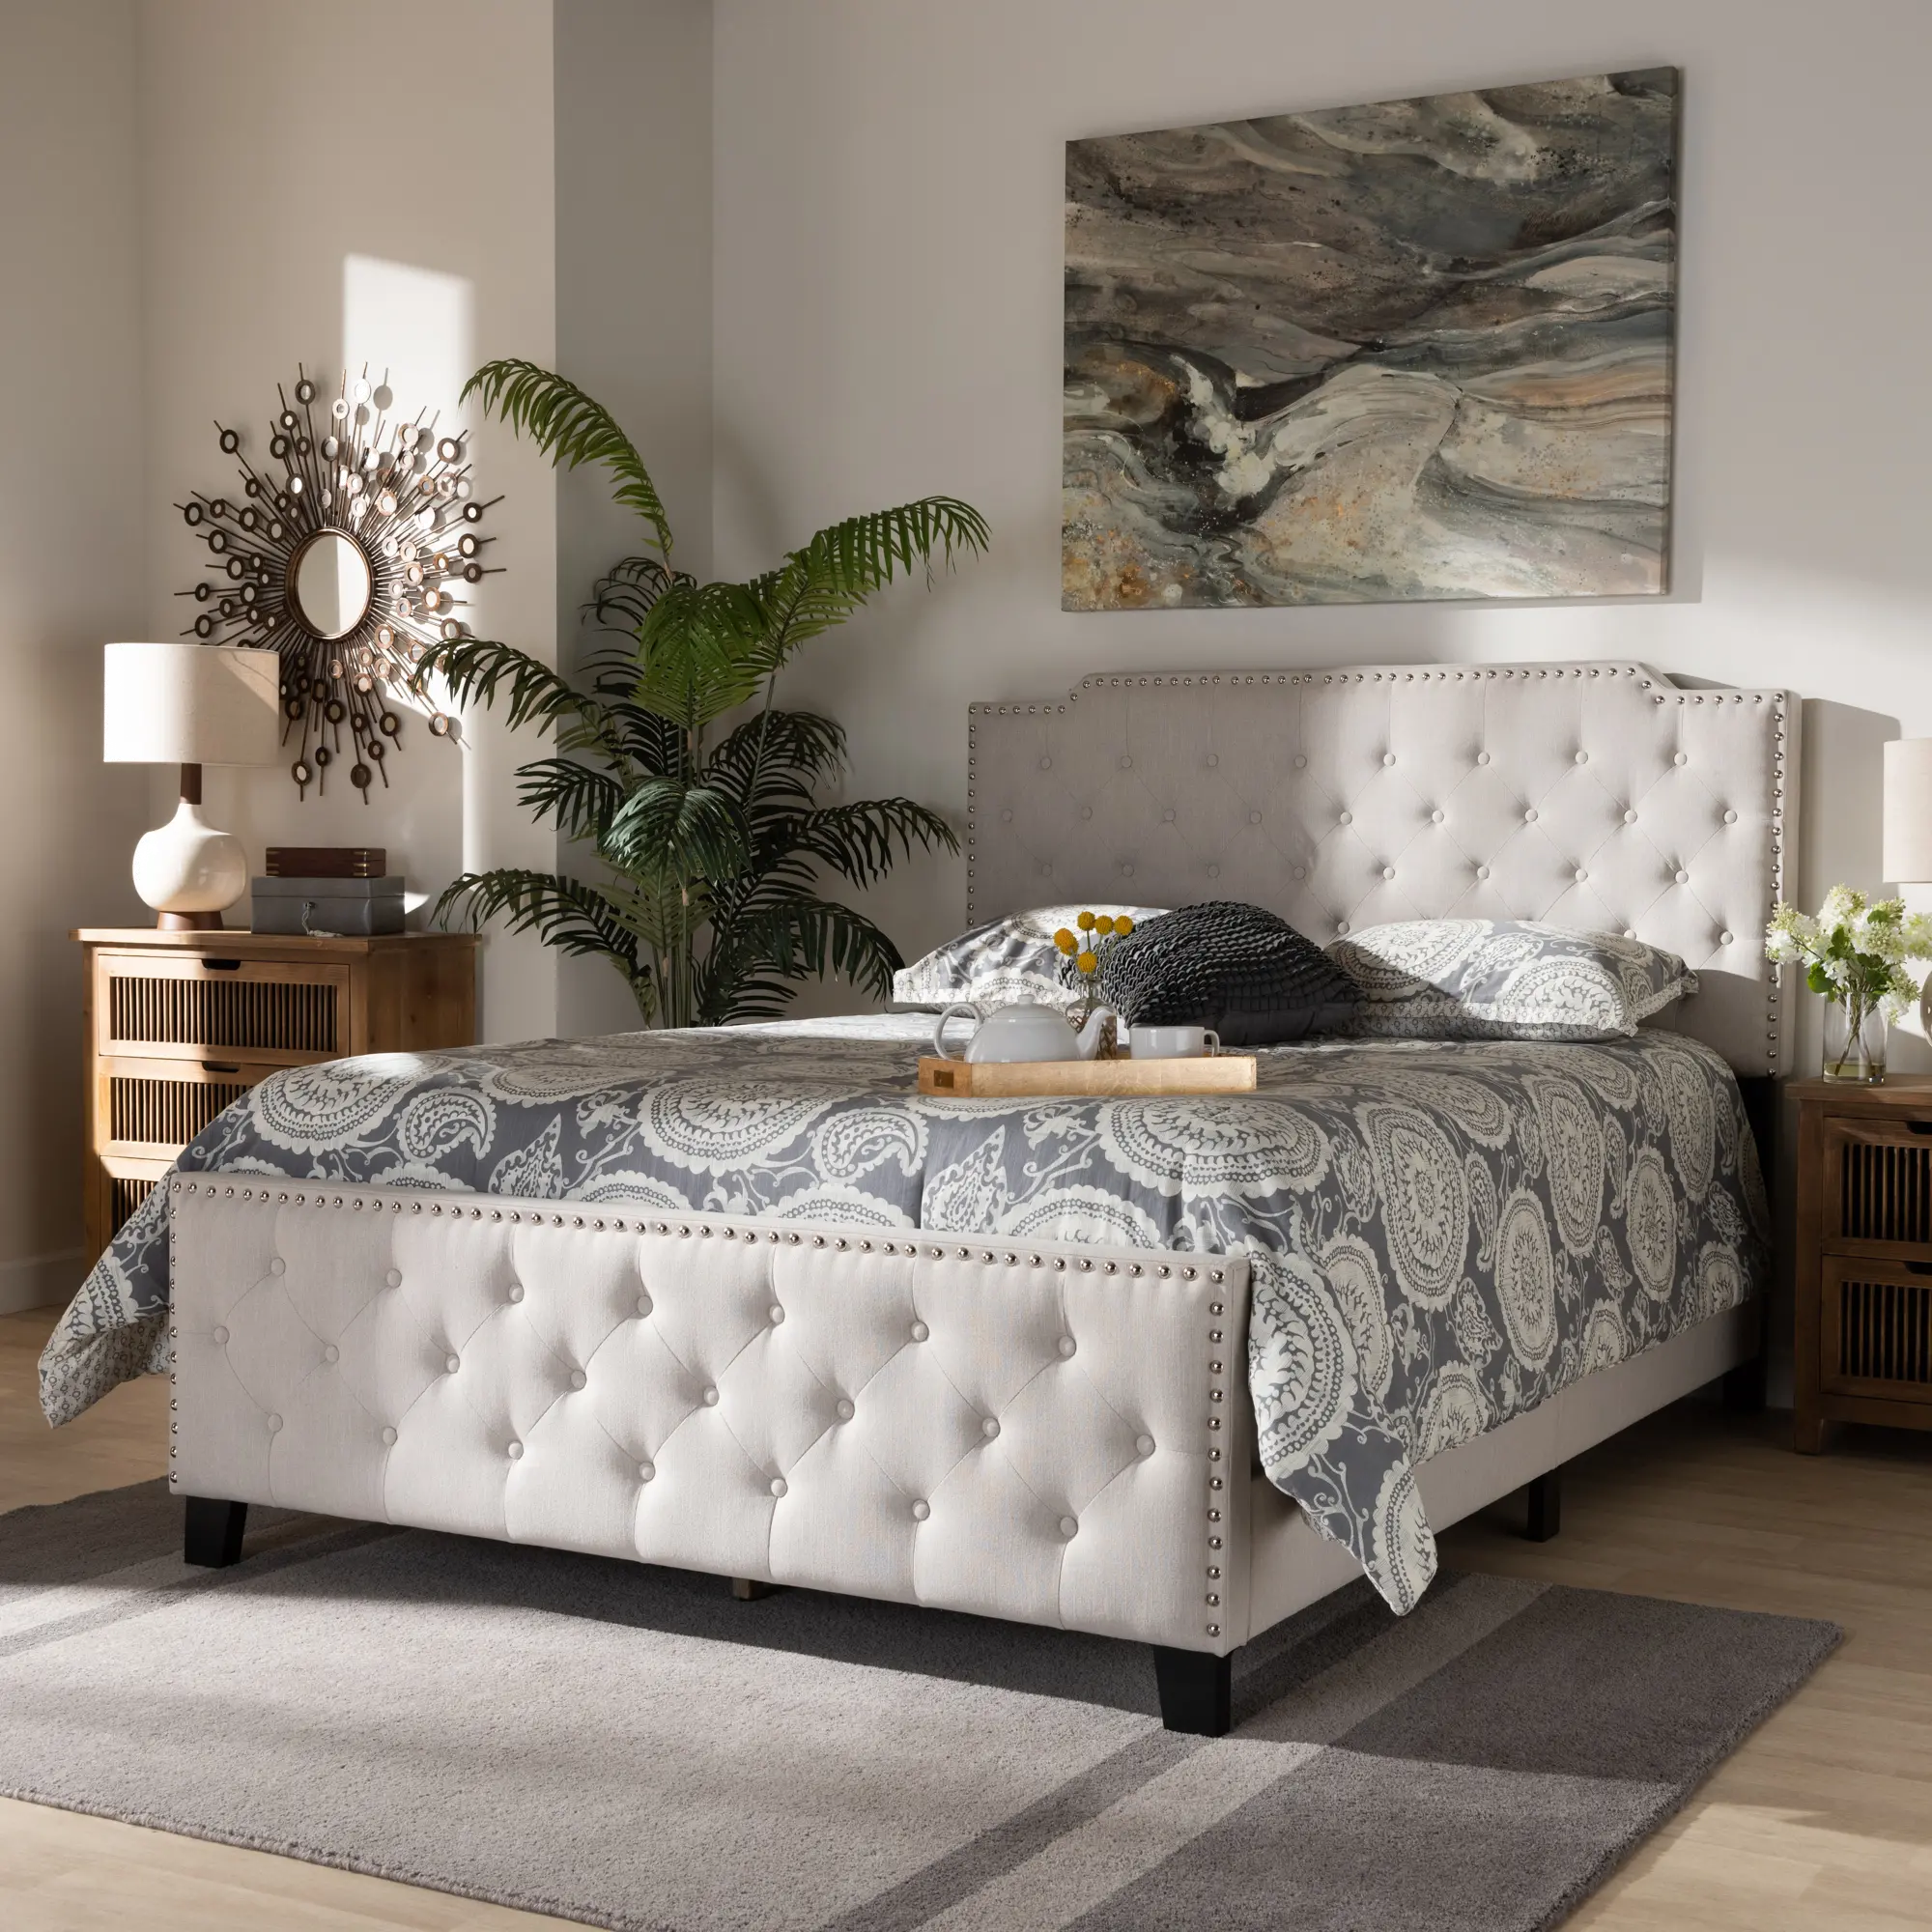 162-10324-RCW Contemporary Beige Queen Upholstered Bed - Katey sku 162-10324-RCW